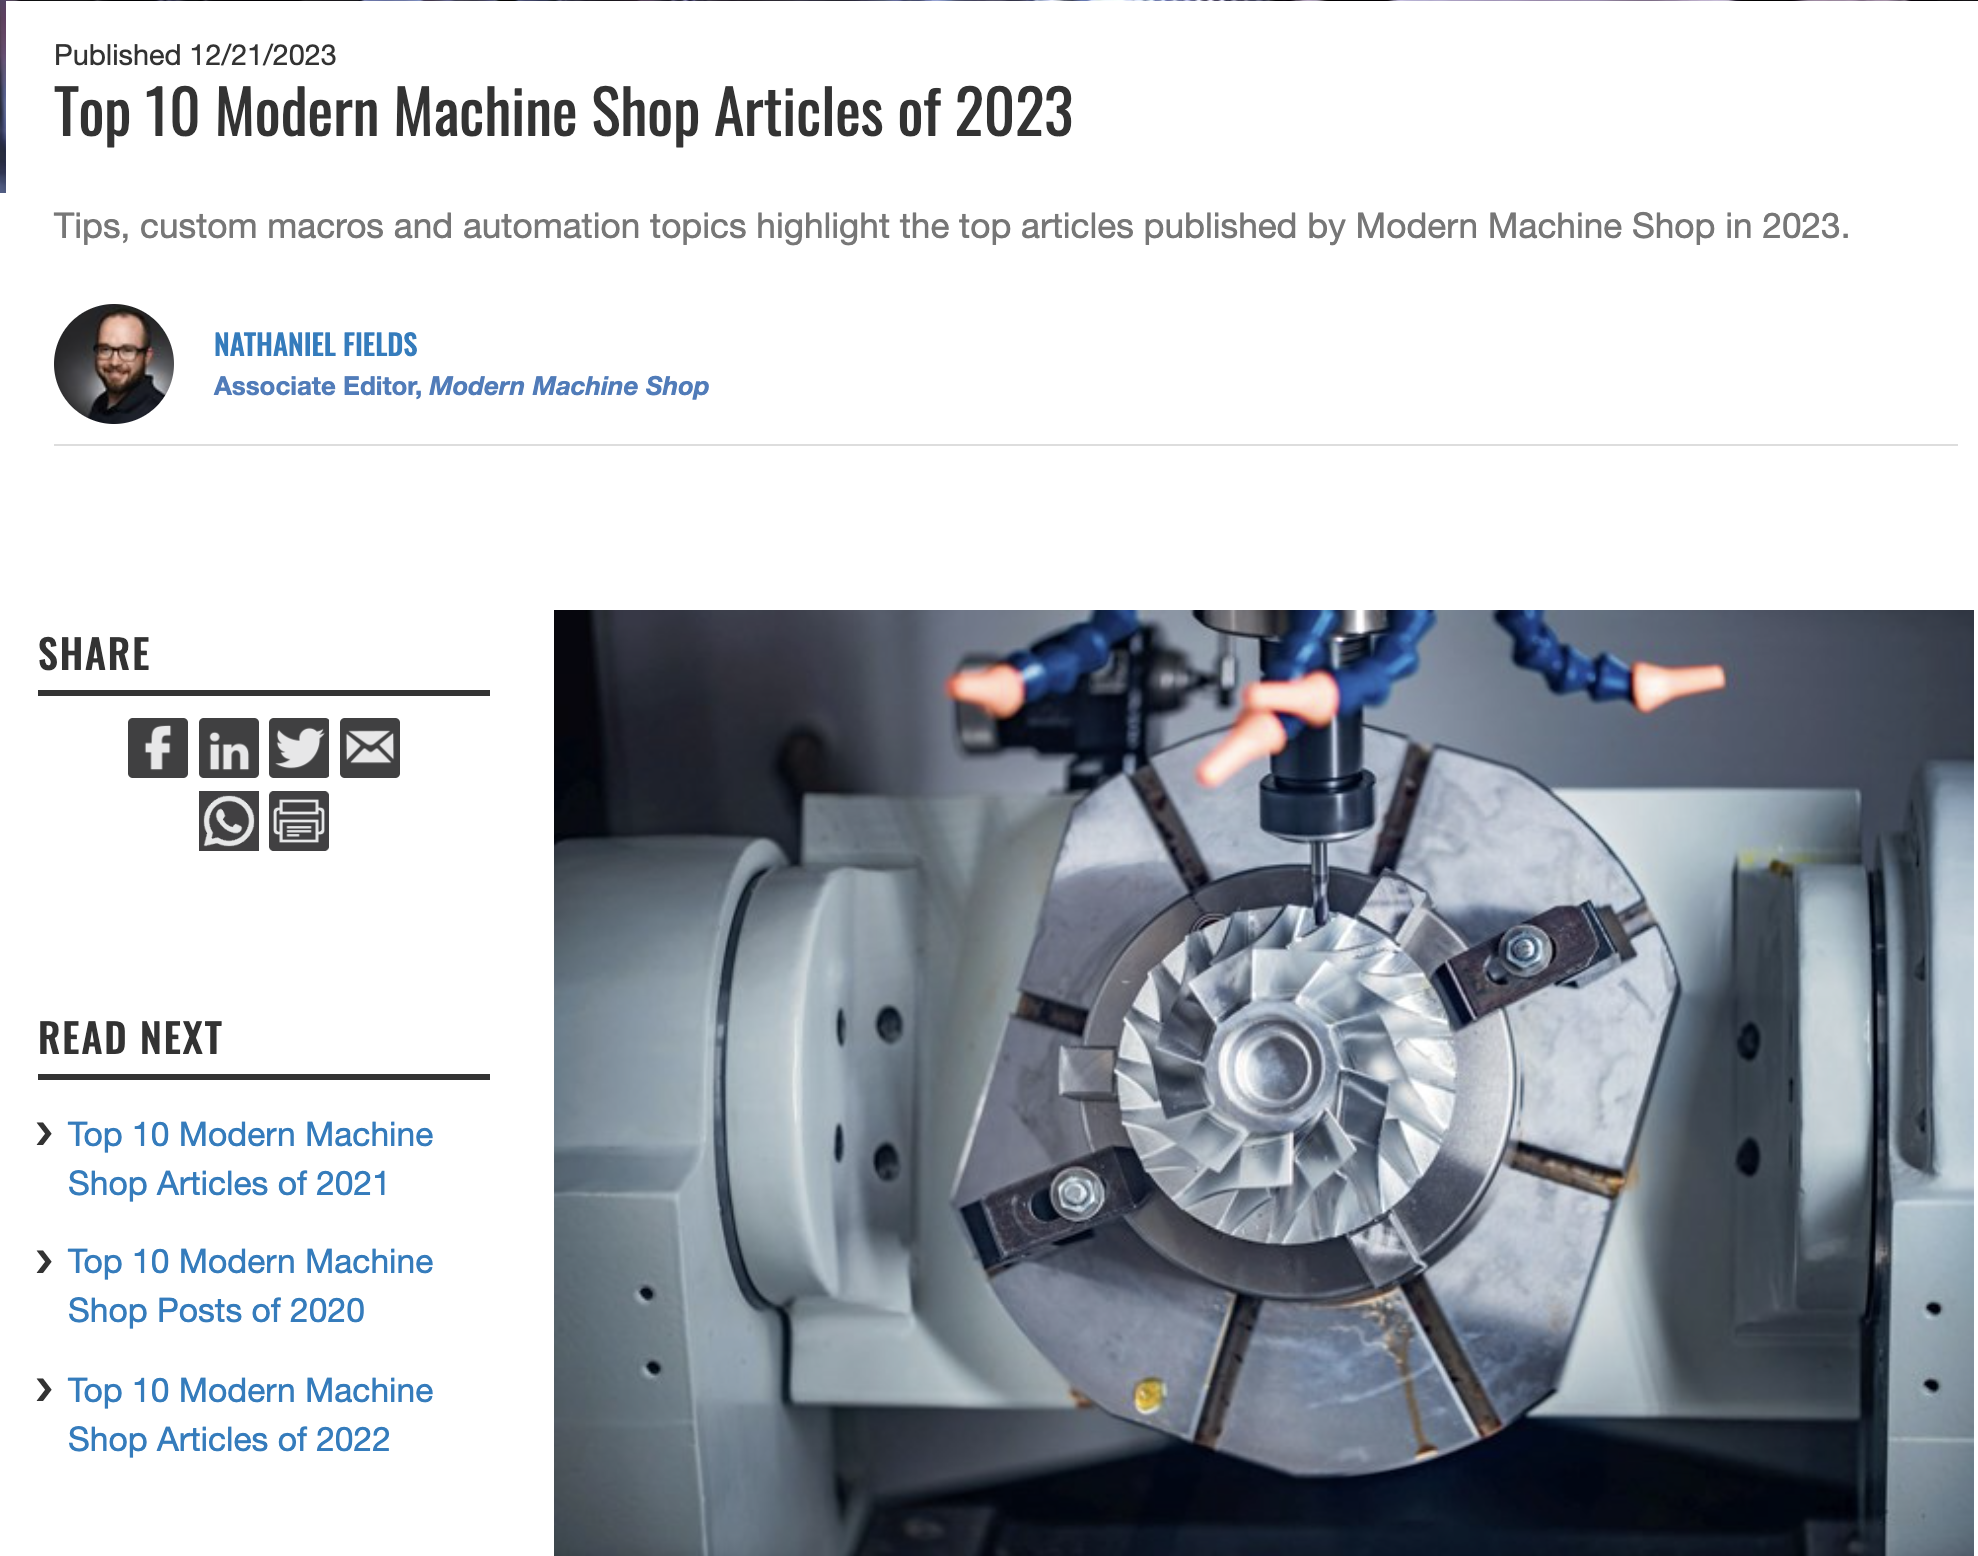 Aerotech Machining featured as one of Modern Machine Shop’s Top 10 business articles of 2023